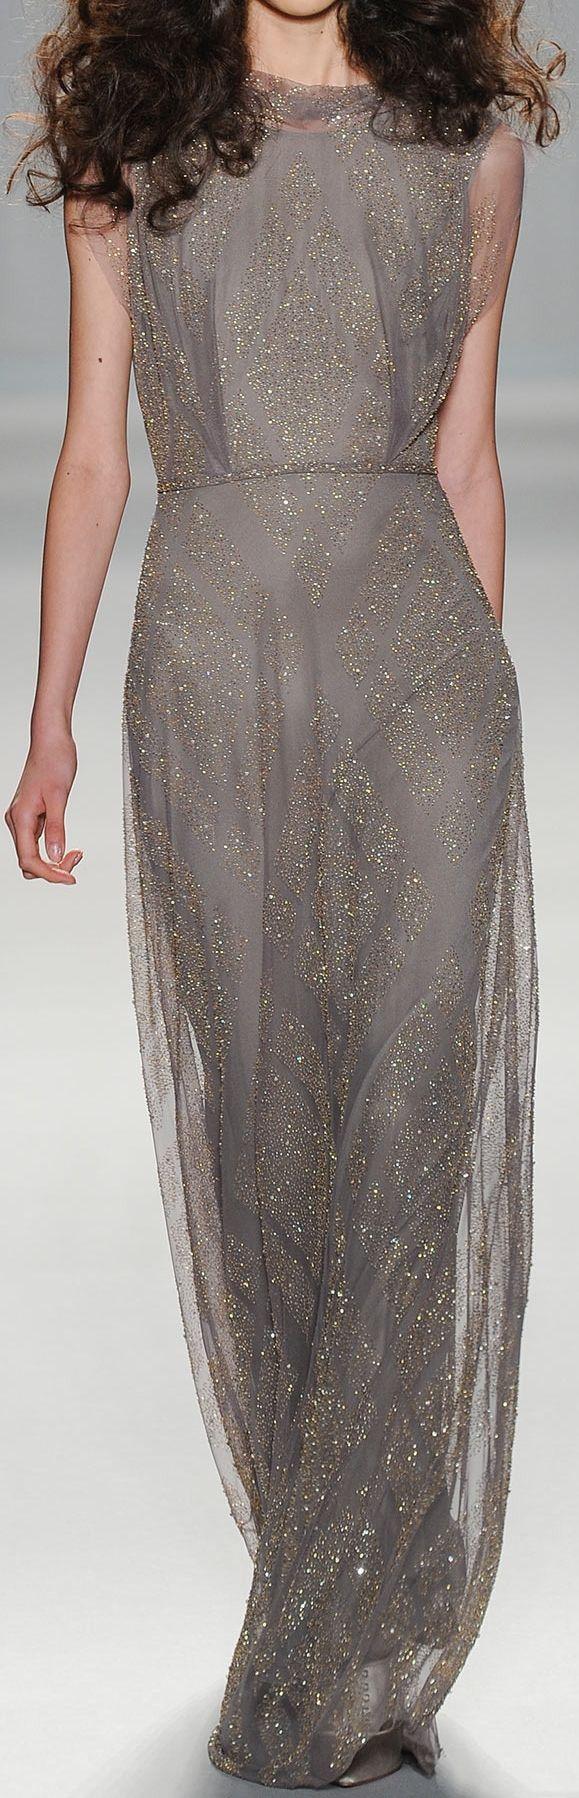 Hochzeit - Jenny Packham Spring 2014 Ready-to-Wear Fashion Show: Complete Collection